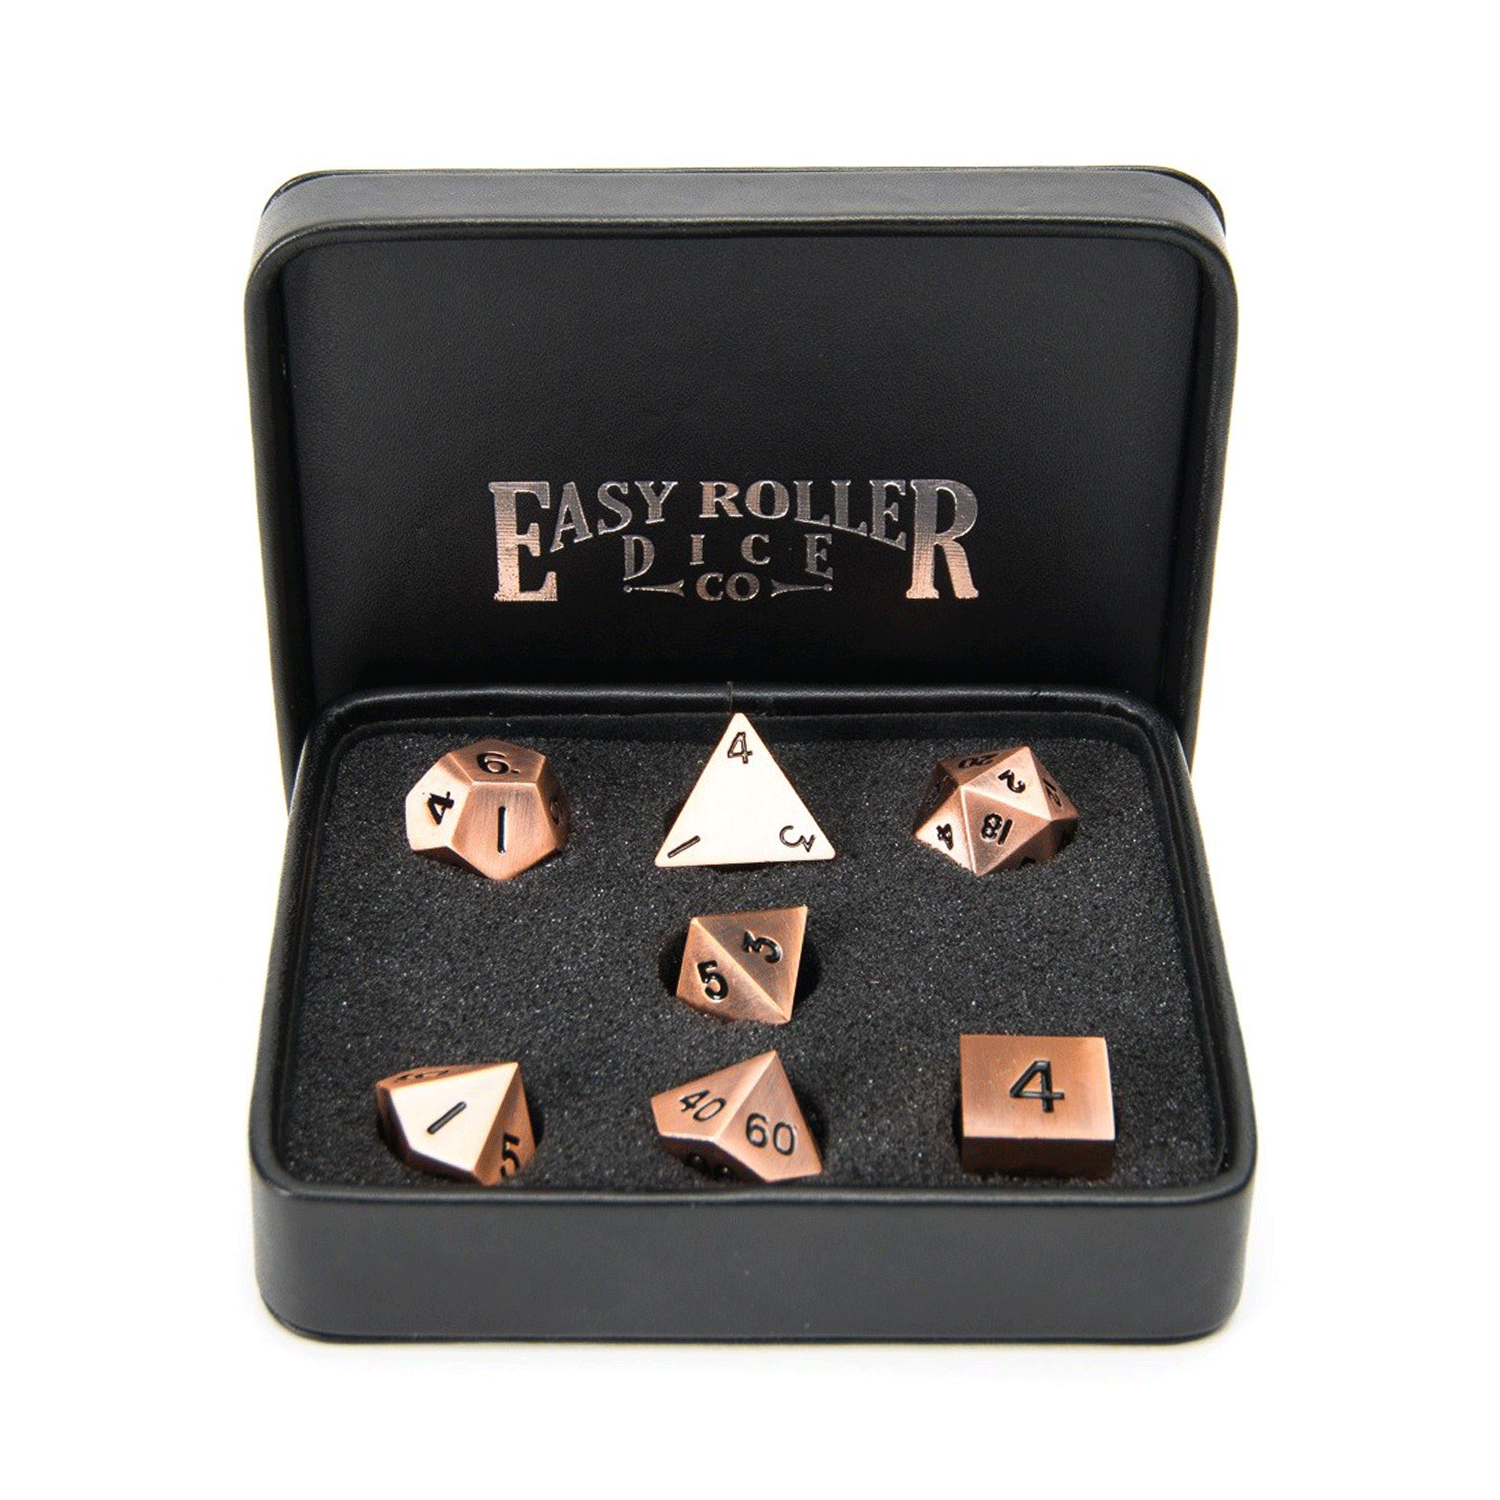 Easy roller dice review: traditional & legendary copper